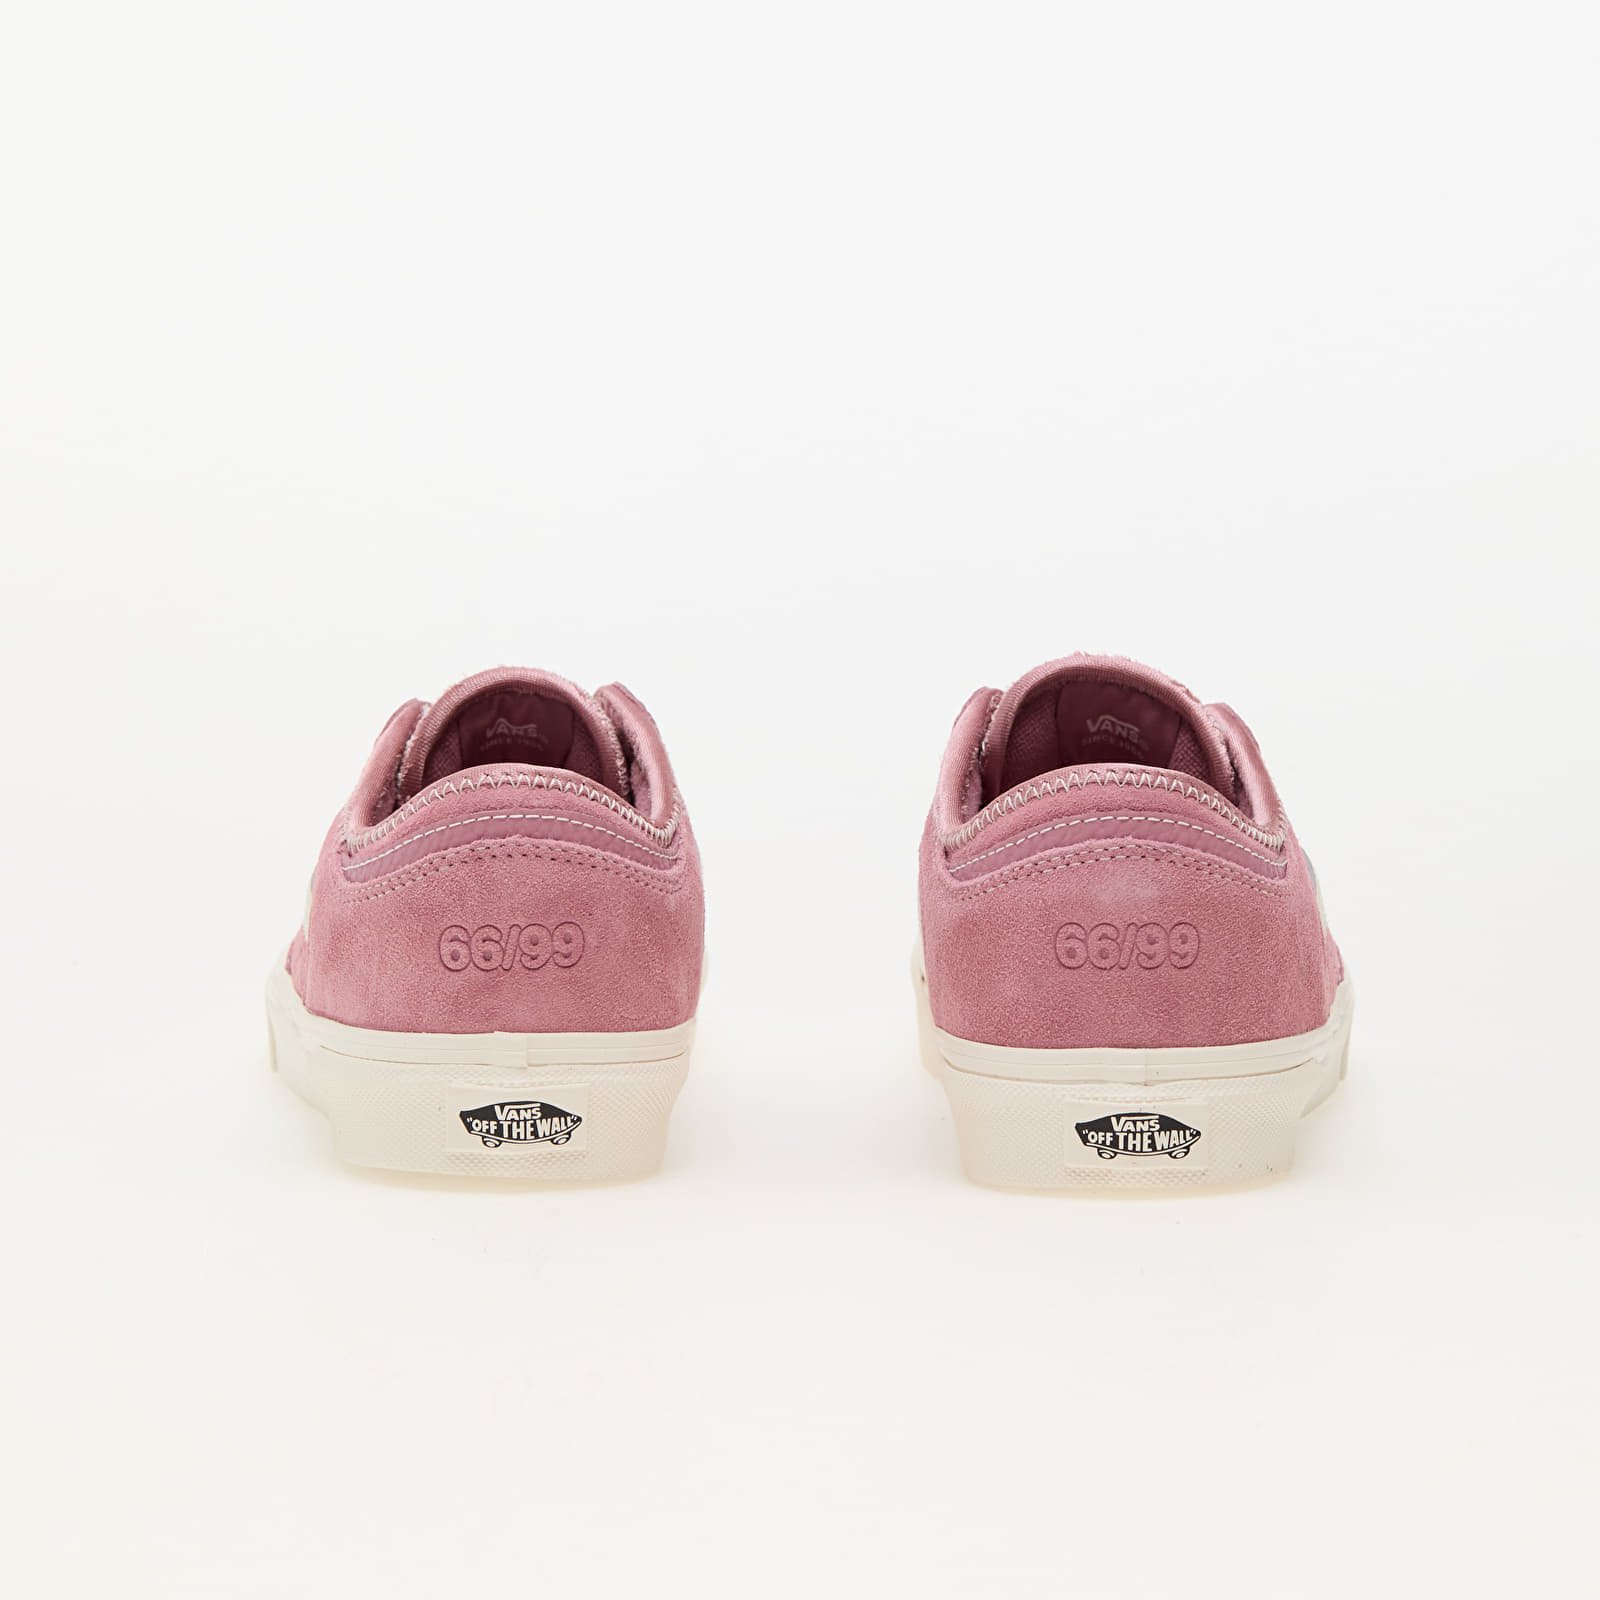 Rowley Classic Pink, Low-top sneakers